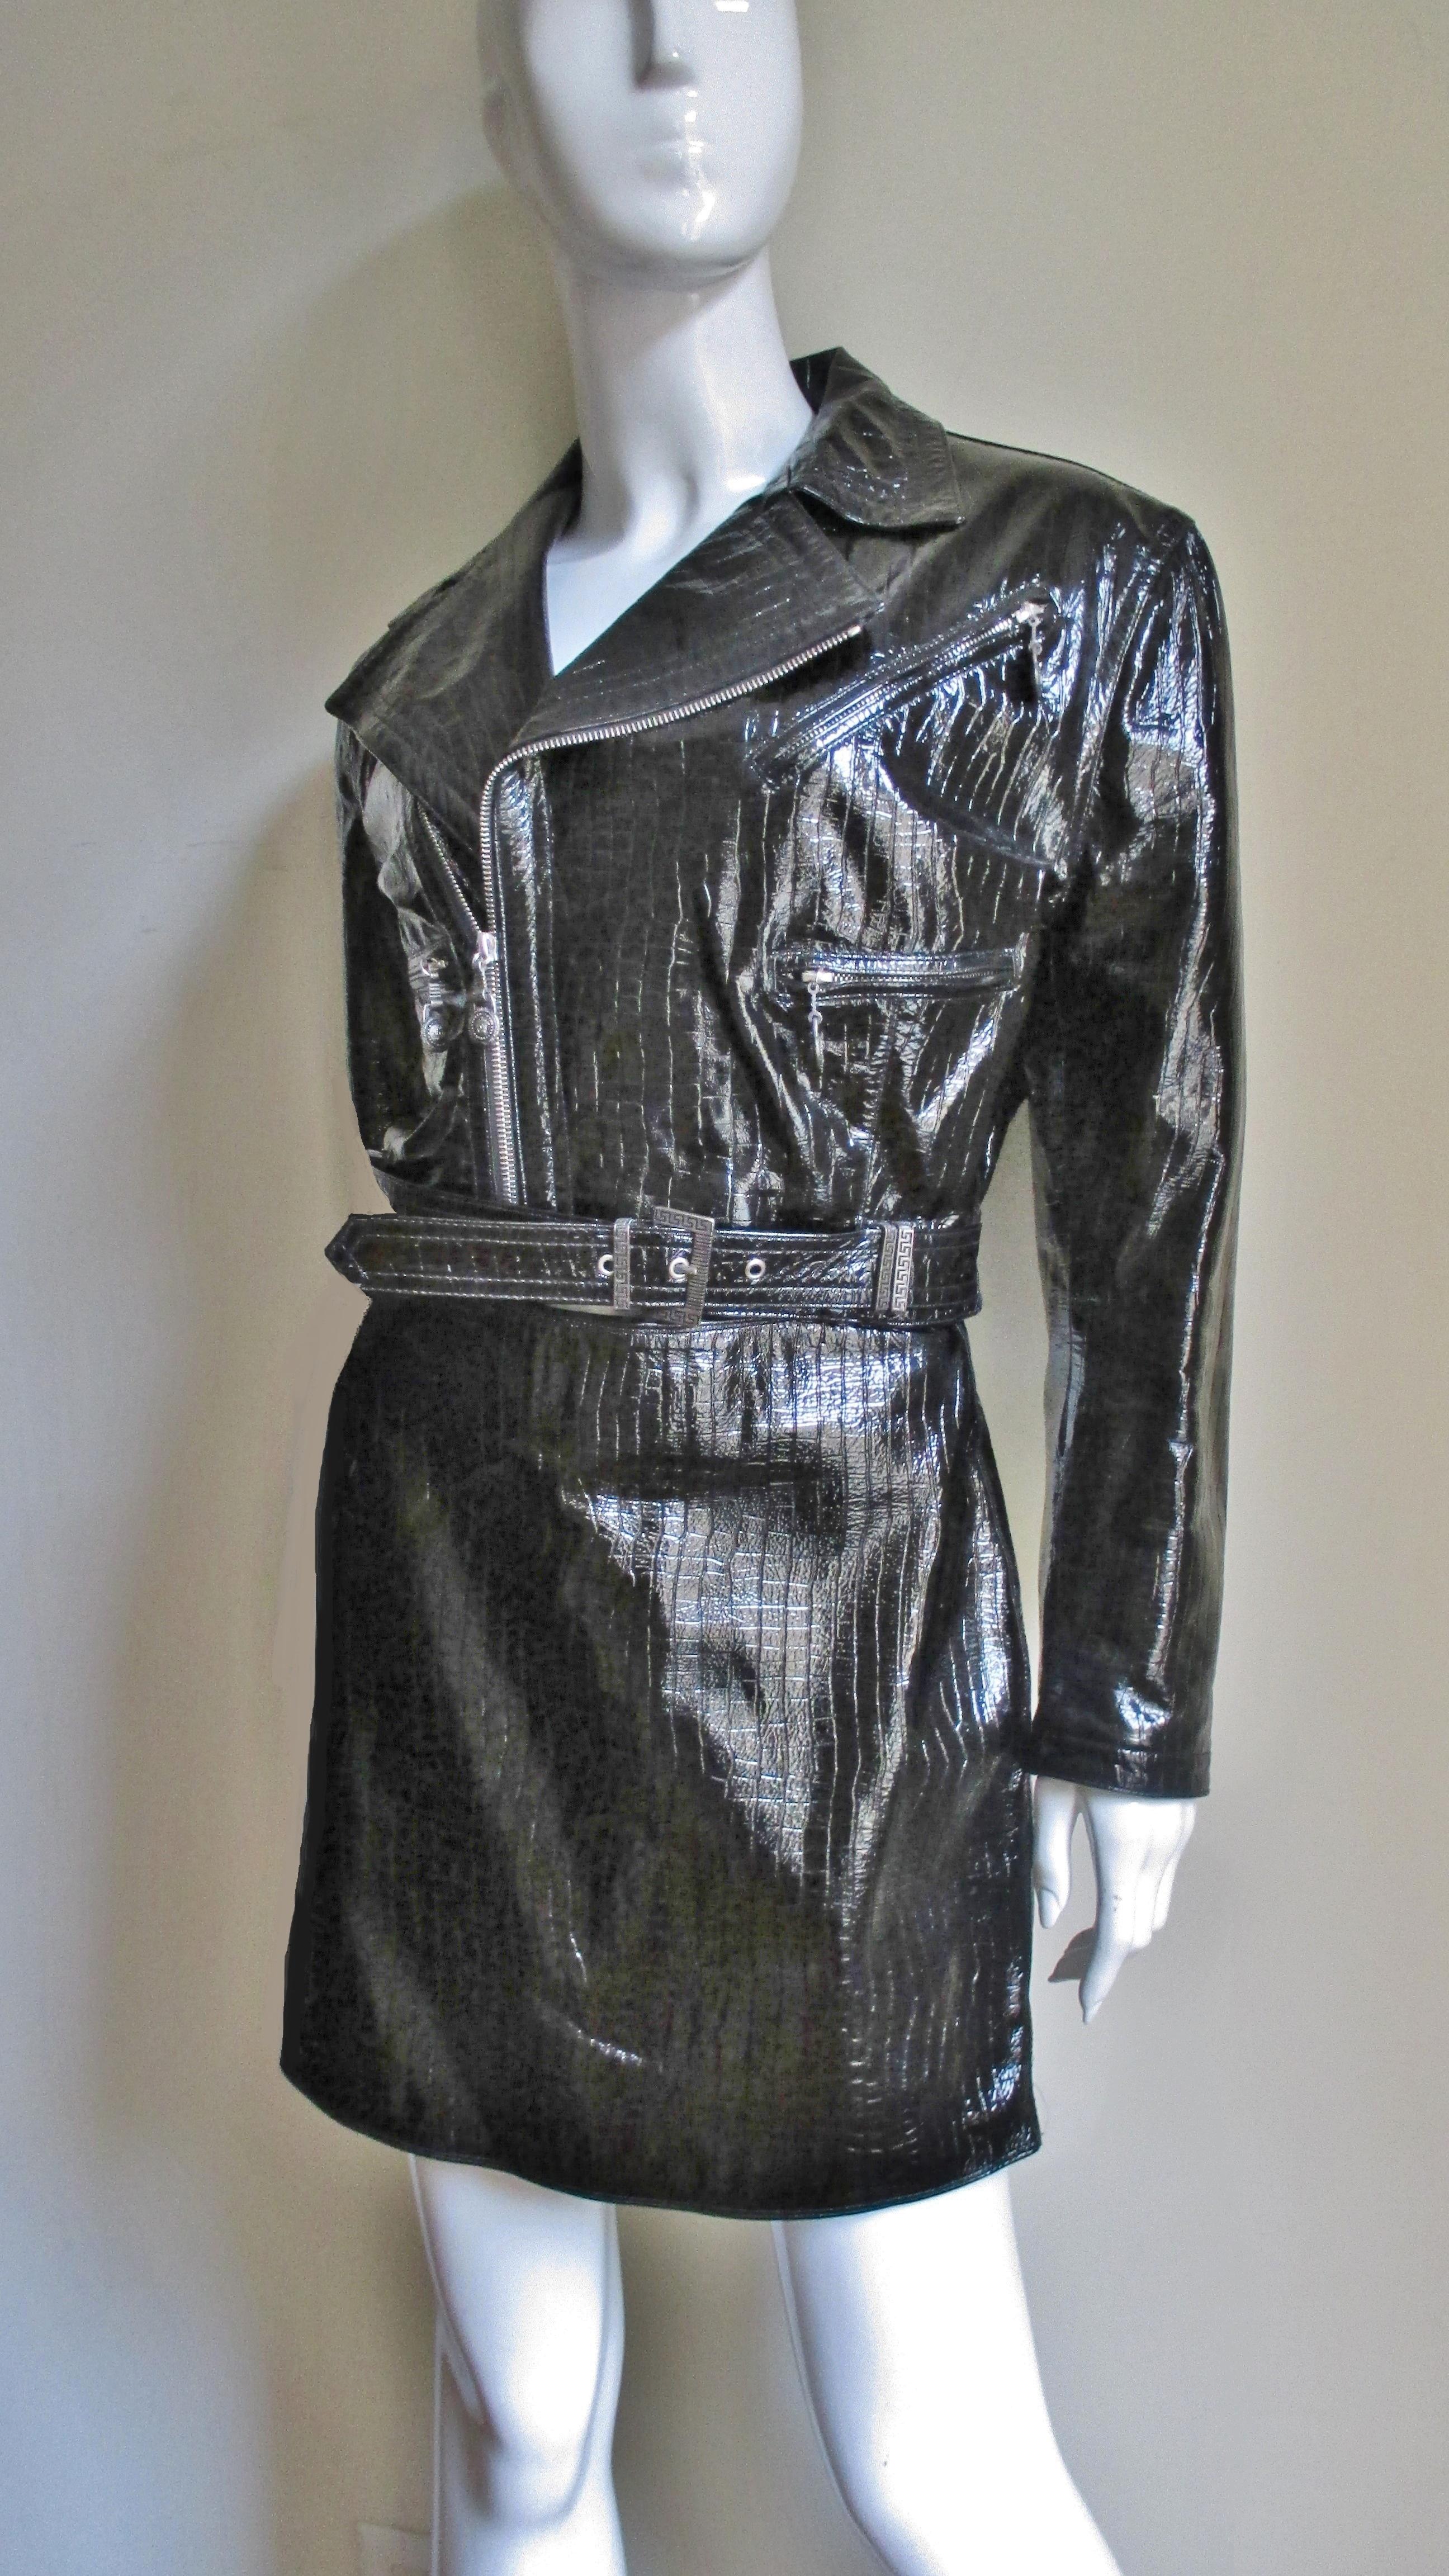 Gianni Versace Leather Motorcycle Jacket and Skirt A/W 1994 For Sale 1